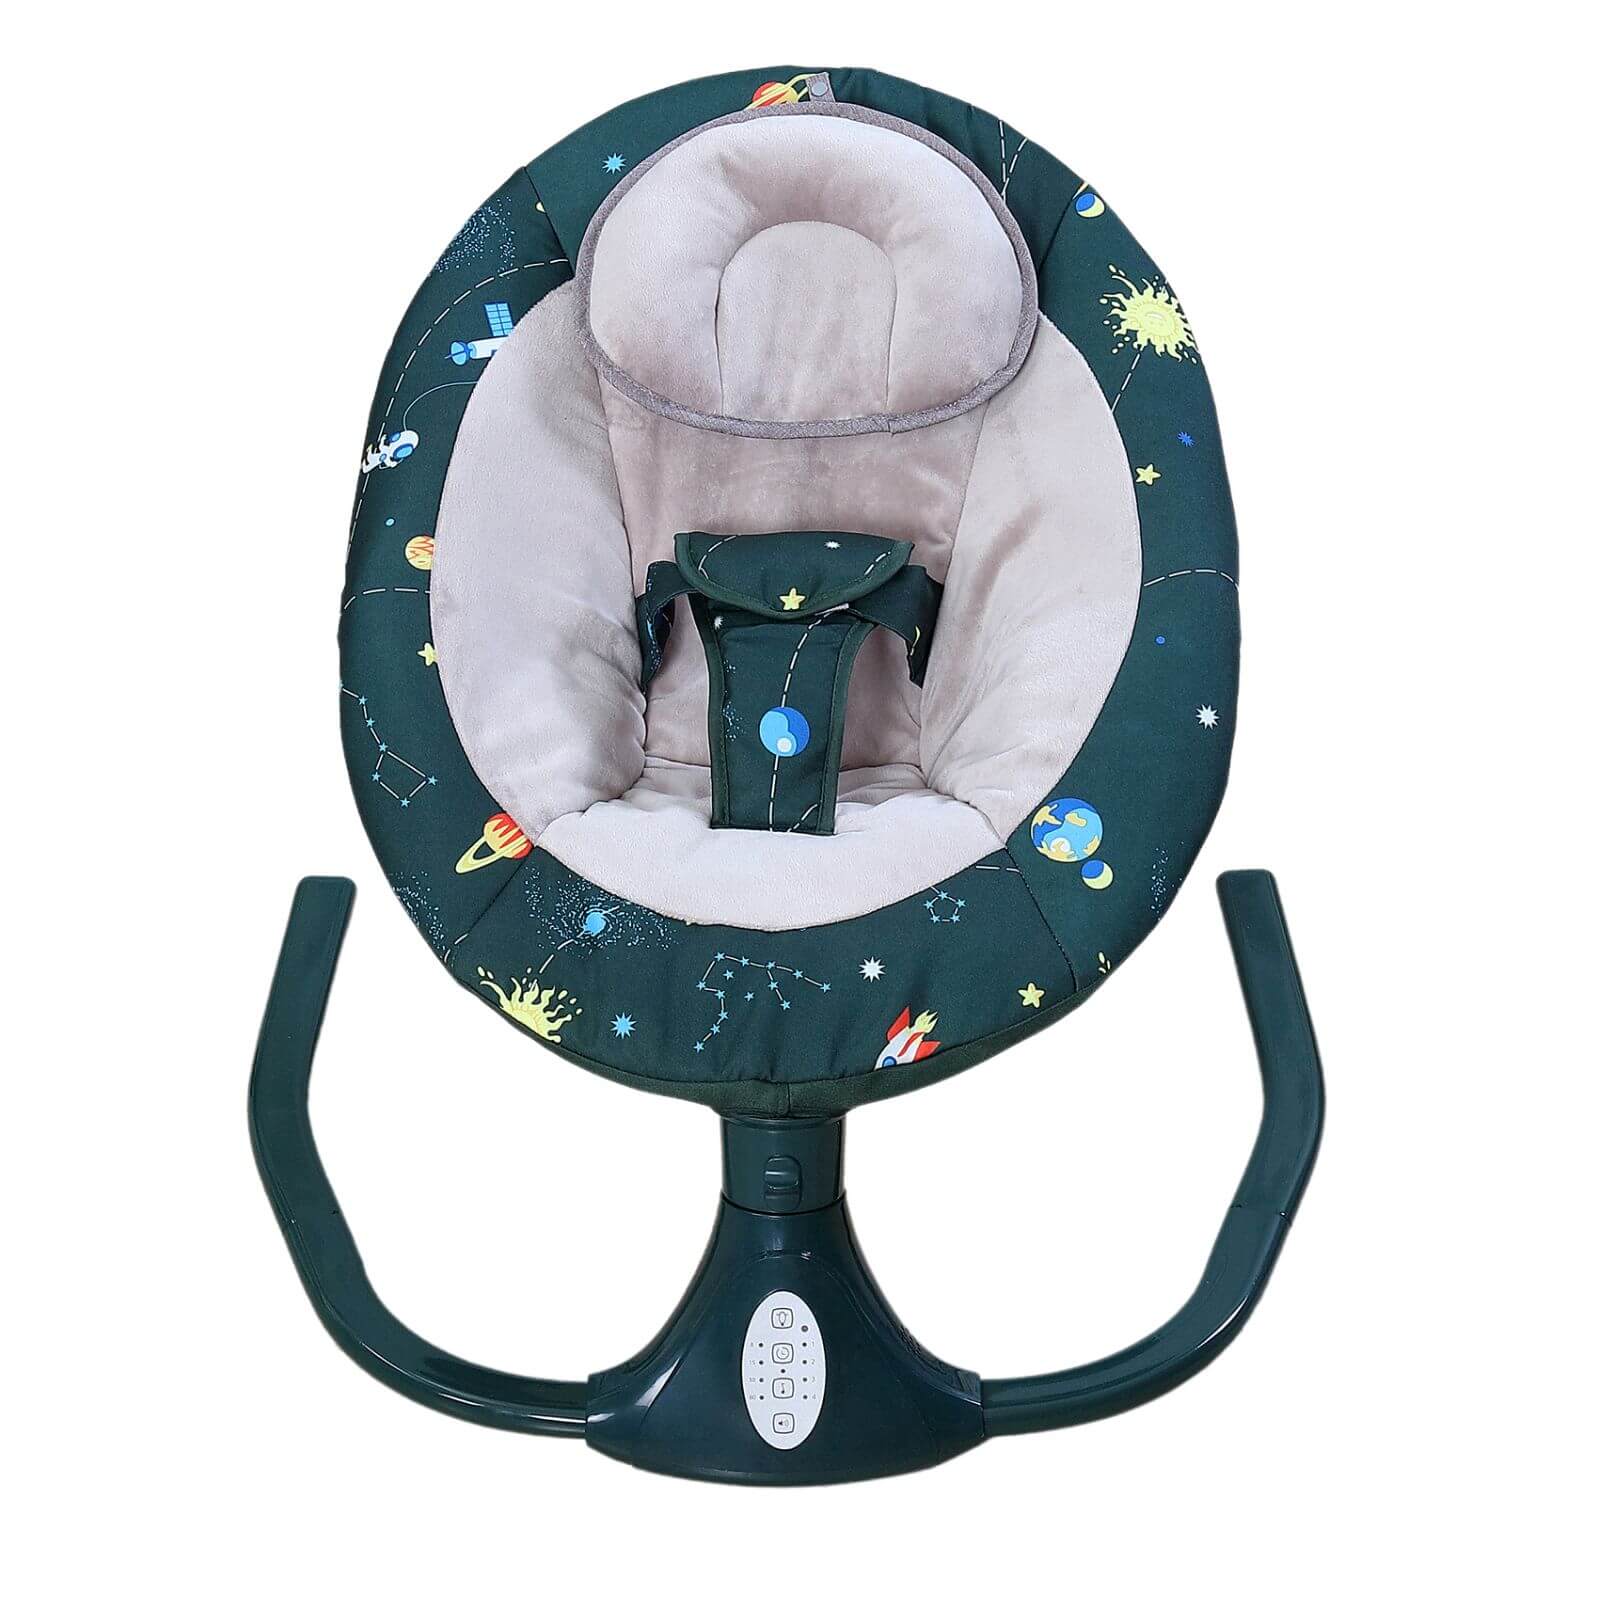 Smart Baby Swing Cradle Rocker Bed/ Bouncer Seat Infant Crib Remote Chair -Dark Green front 